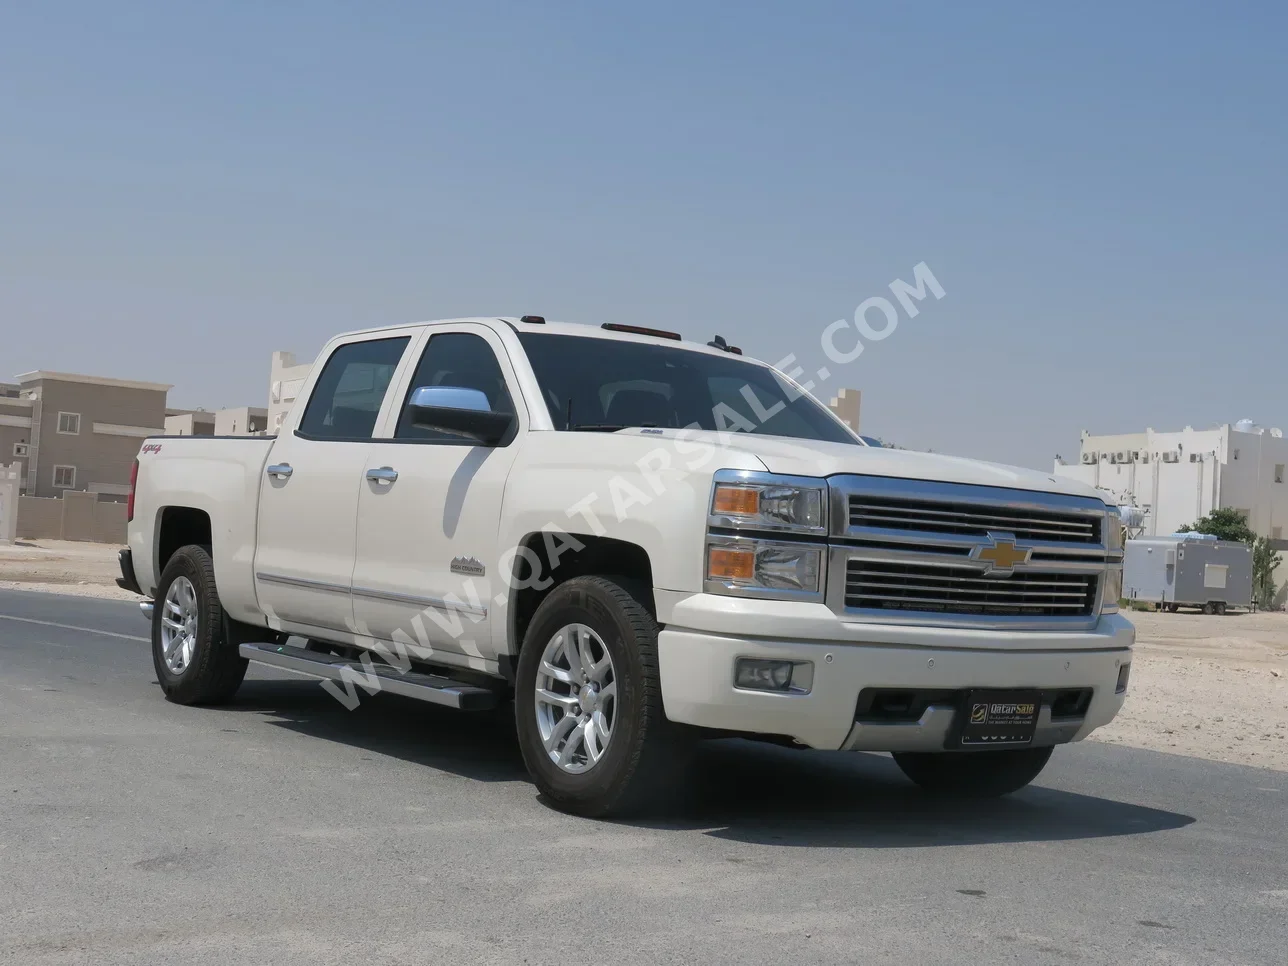 Chevrolet  Silverado  High Country  2014  Automatic  288,000 Km  8 Cylinder  Four Wheel Drive (4WD)  Pick Up  White